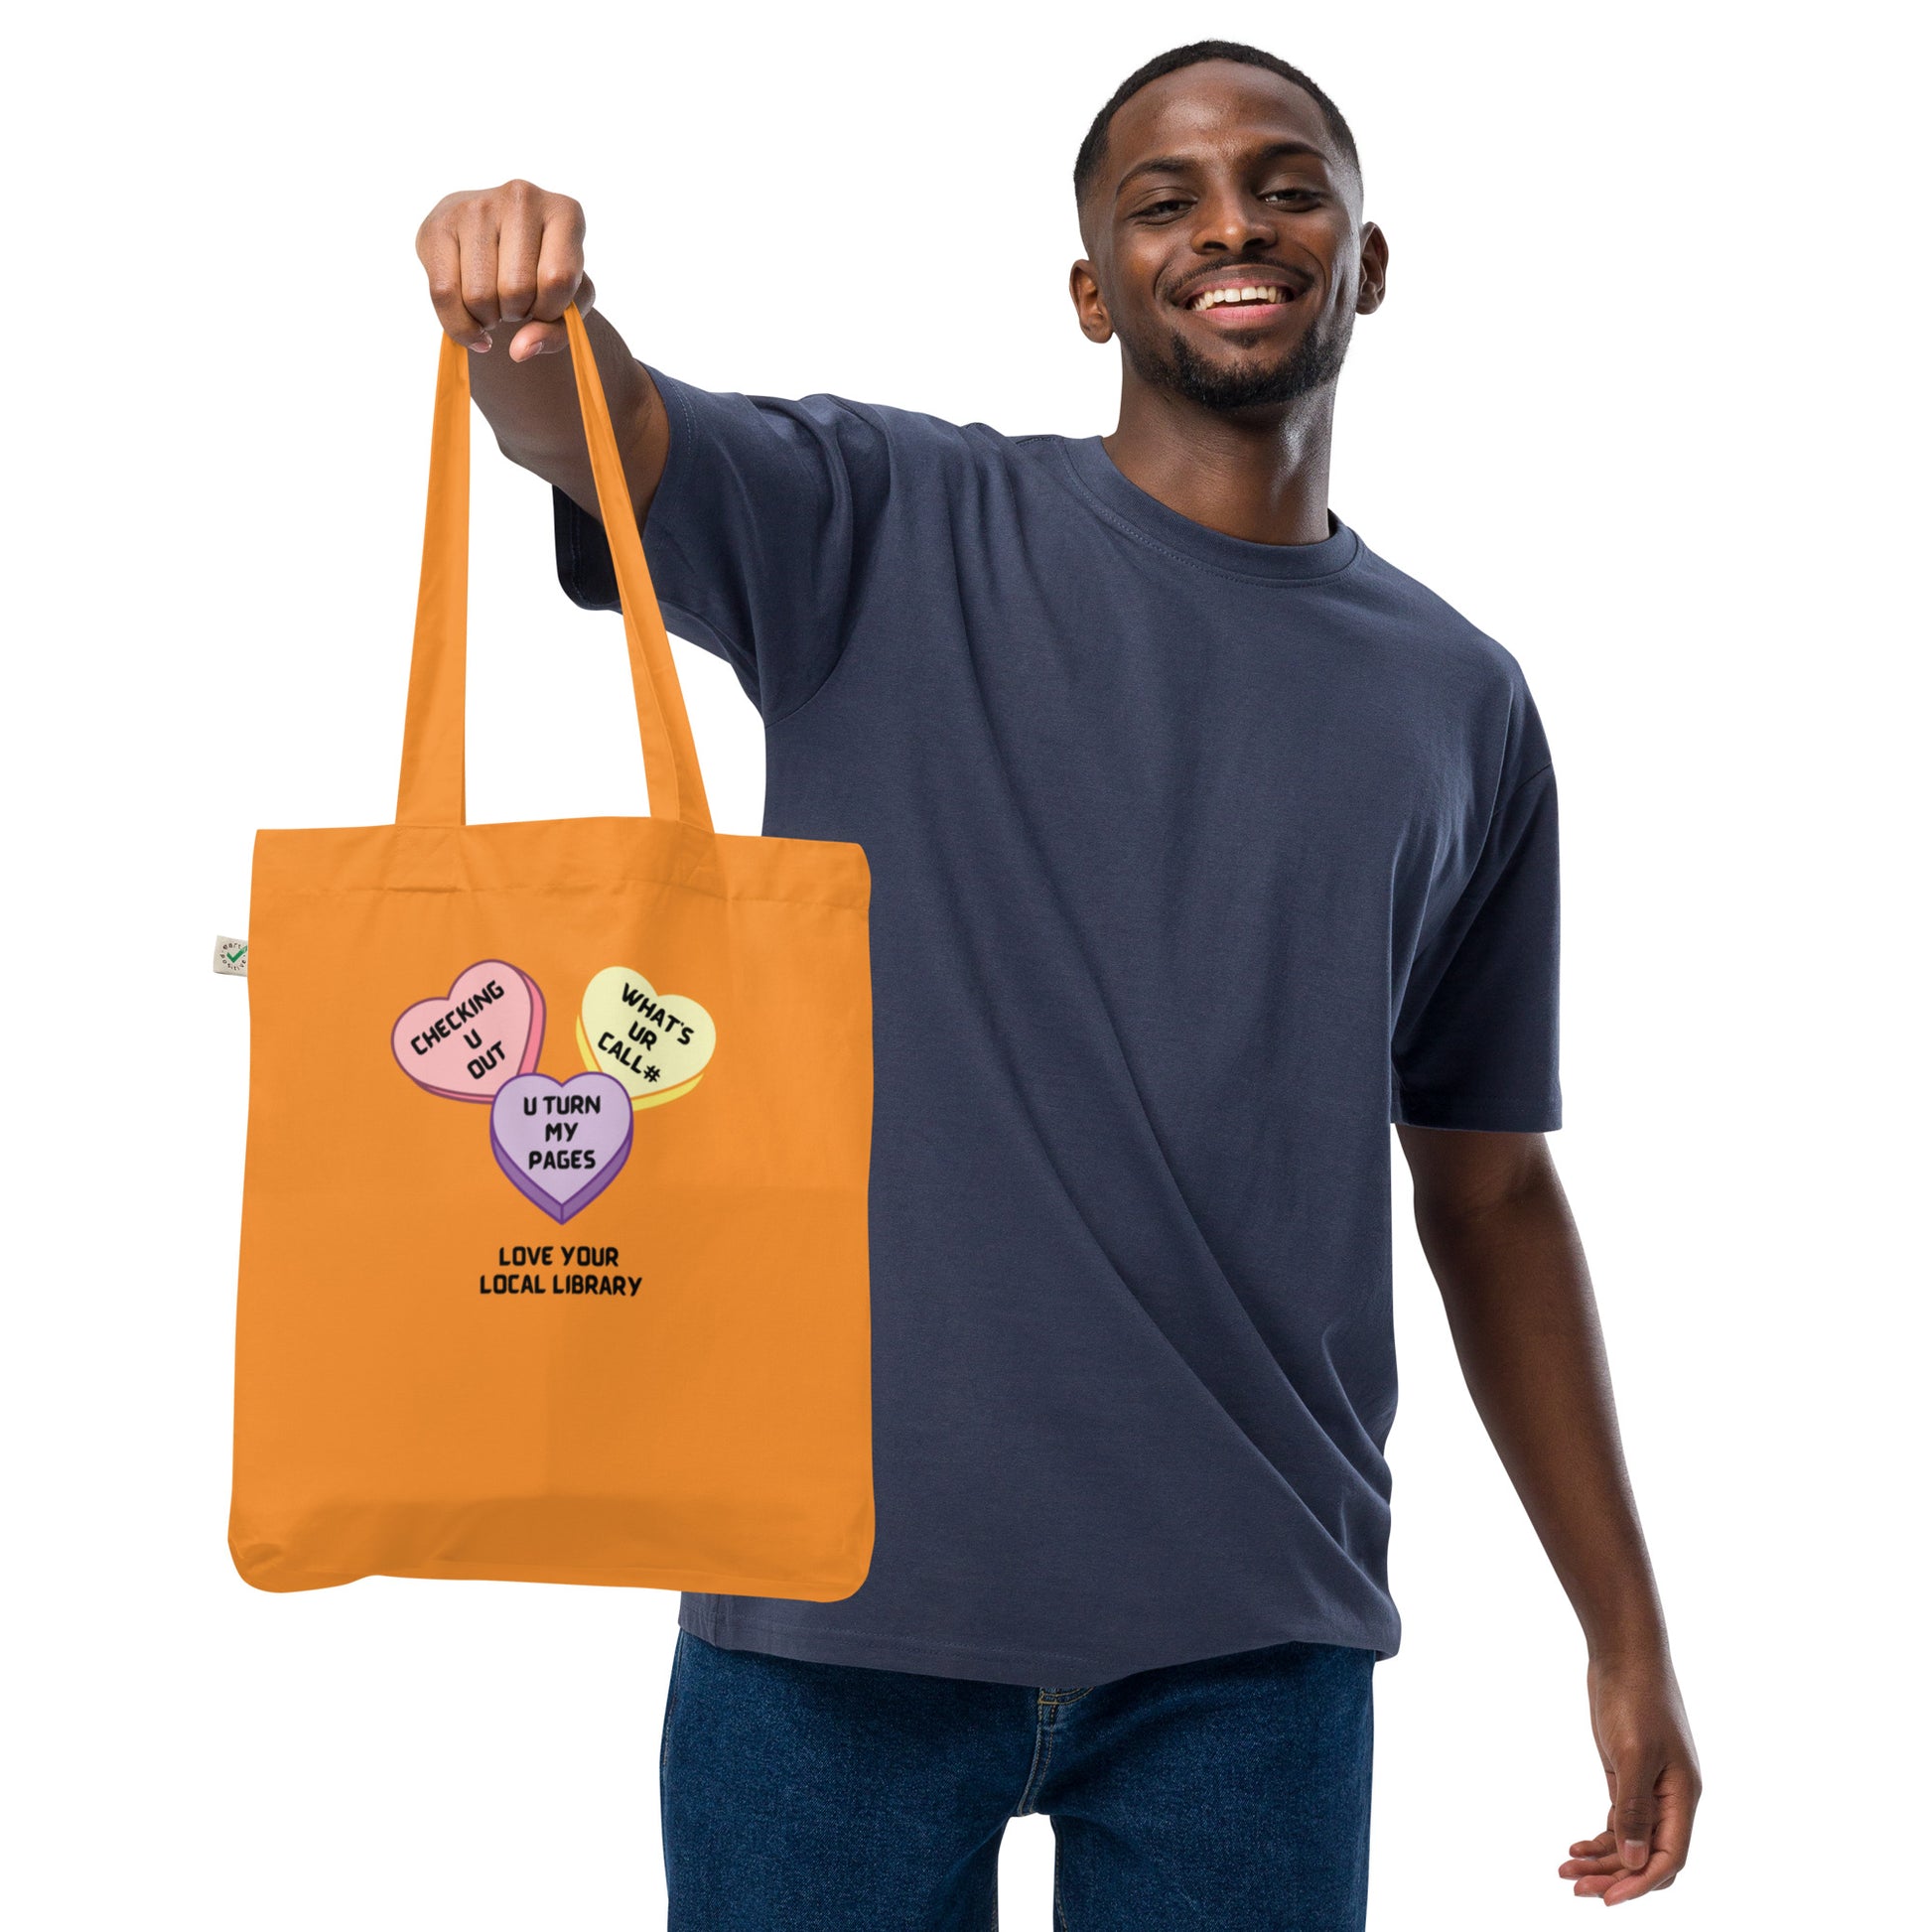 Love Your Local Library Candy Hearts Organic Fashion Tote Bag - The Spinster Librarian Shop